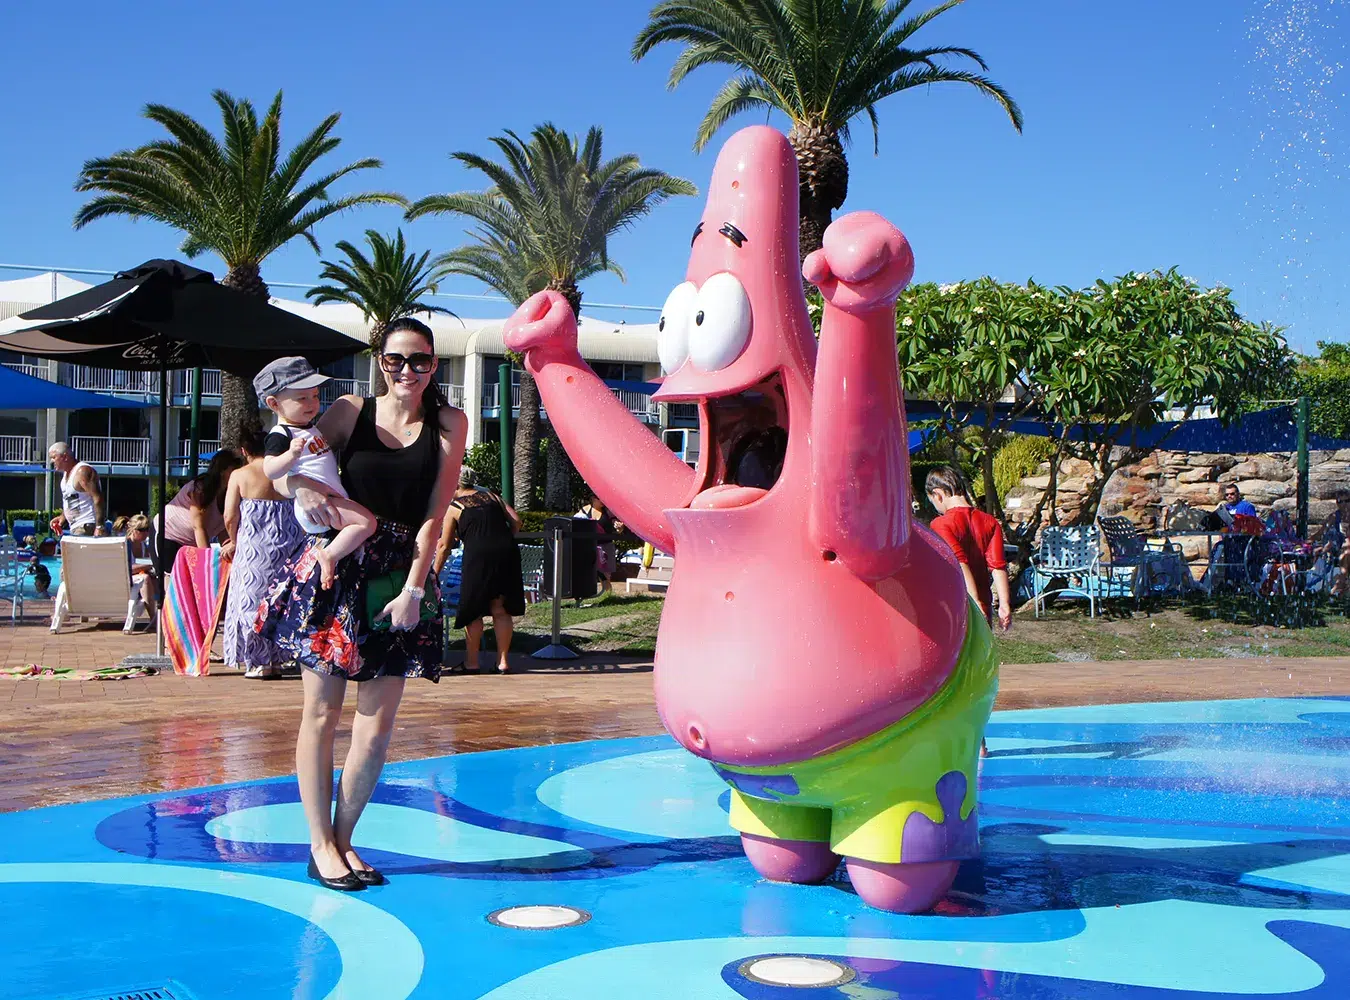 Patrick Star from SpongeBob SquarePants: This is a fun and lively representation of Patrick Star, a character from the popular children's show "SpongeBob SquarePants".